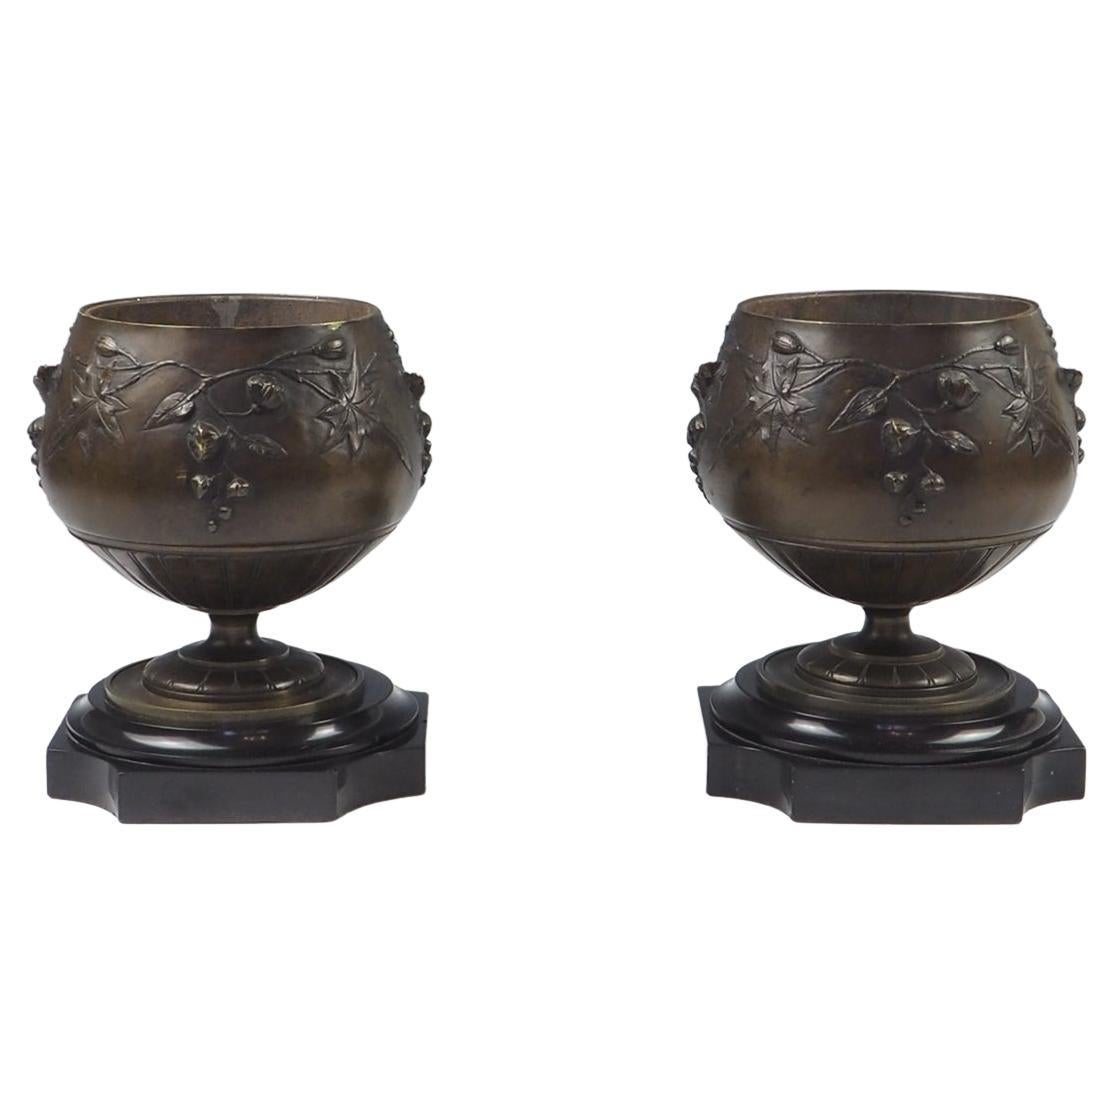 Pair of 19th Century Bronze and Marble Table Top Planters / Urns